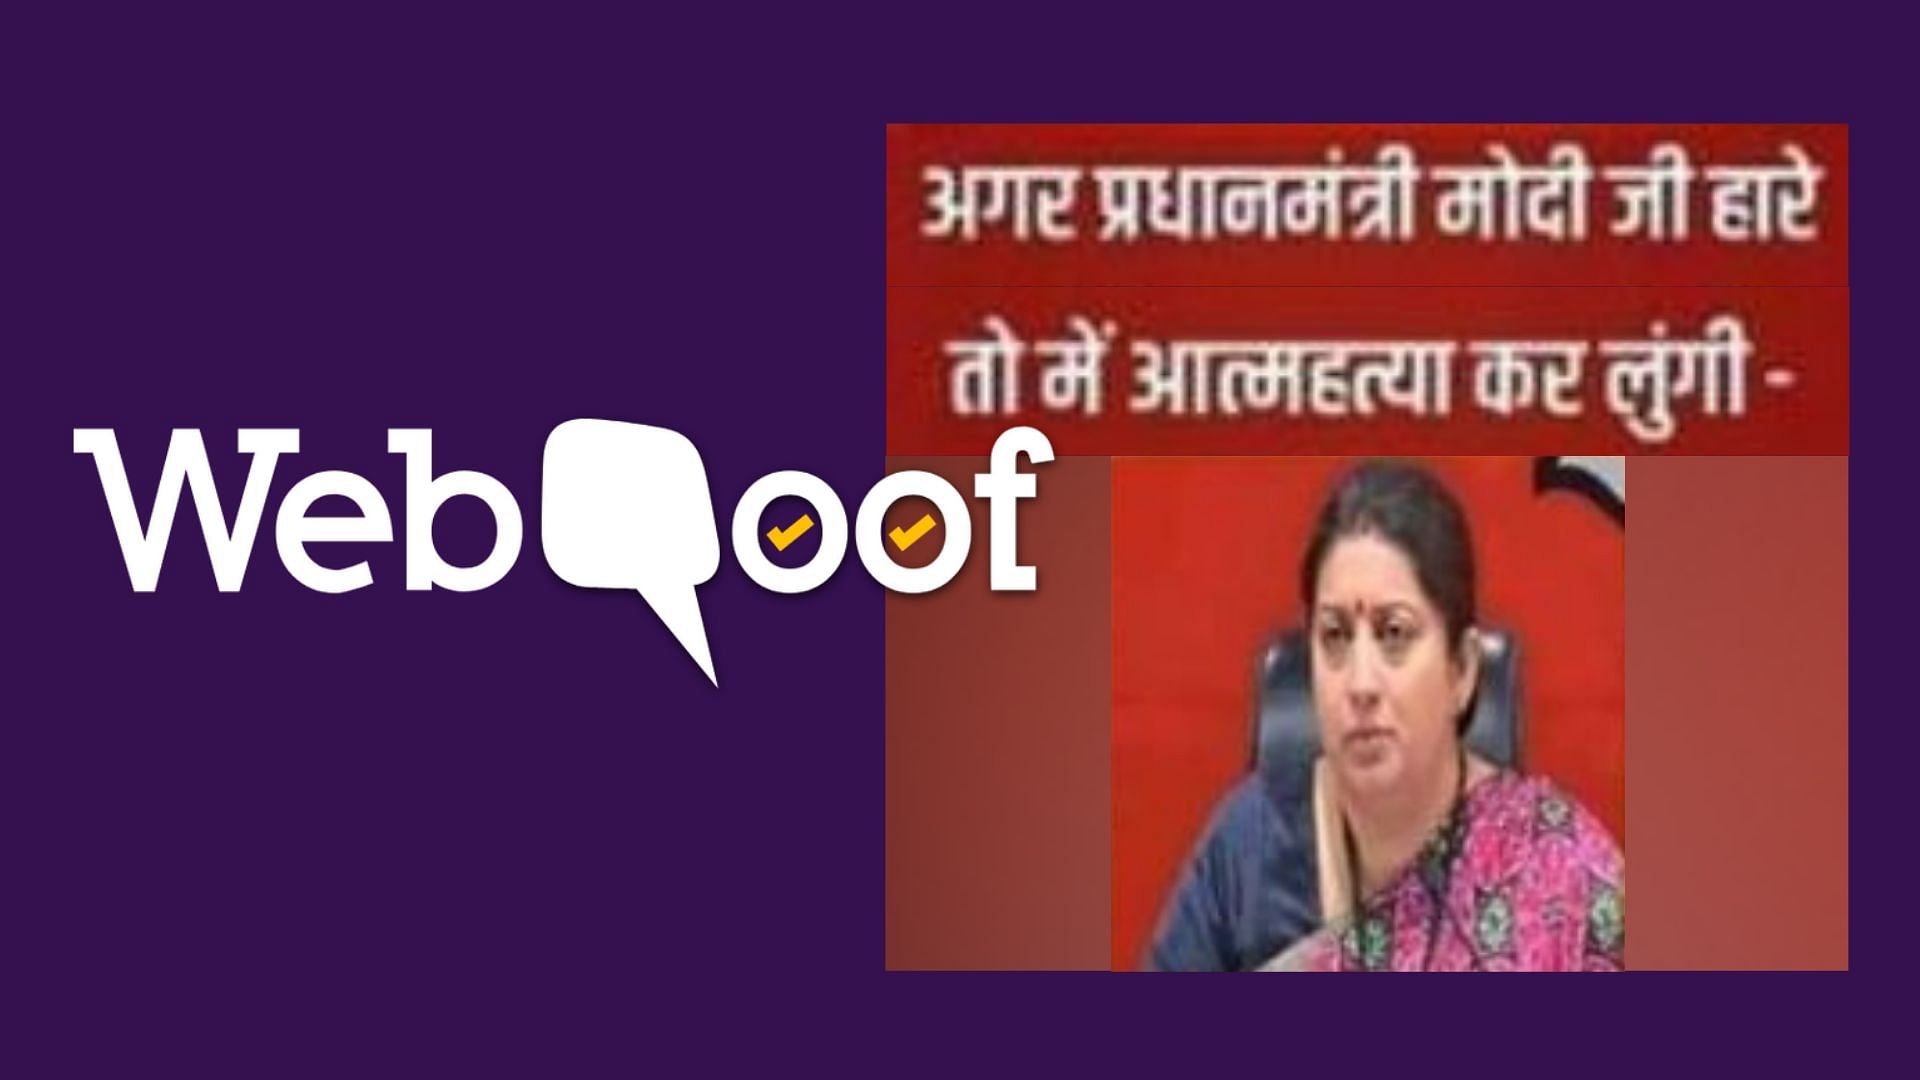 The viral image of Smriti Irani being circulated is an edited version of an ABP News template.